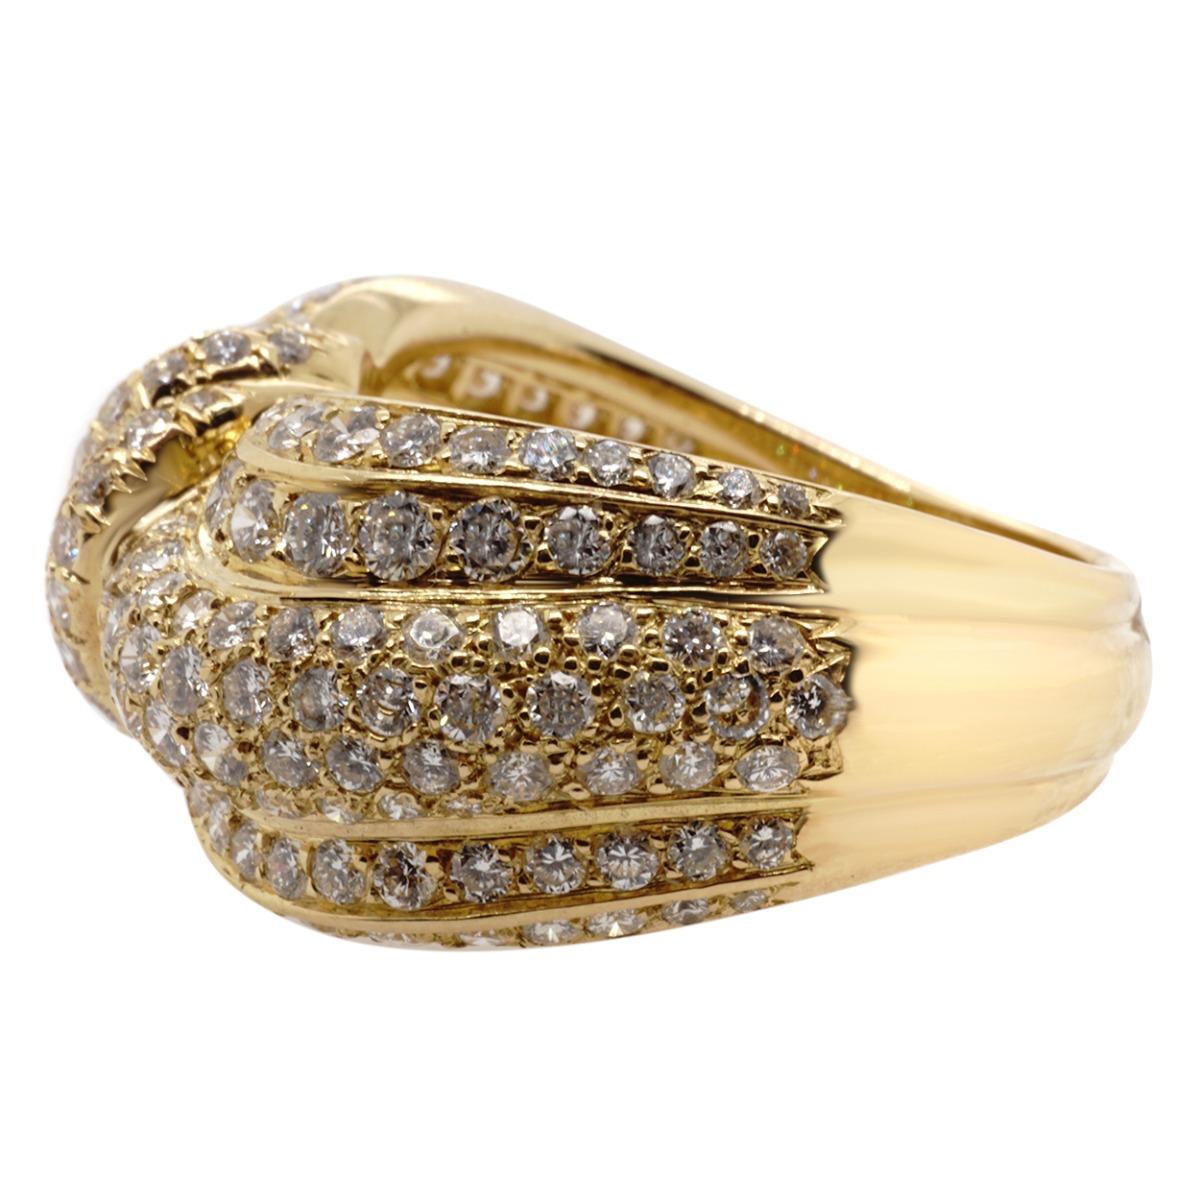 Crafted in 18 karat yellow gold from Van Cleef & Arpels France featuring round diamonds.  Signed VCA France 750 18k with hallmarks and maker mark.   Ring size 9 1/2.  Weighs 13.5 gr./8.7 dwt.  Ring 12.5 in width.  

Diamonds:  Weight estimated 3.00